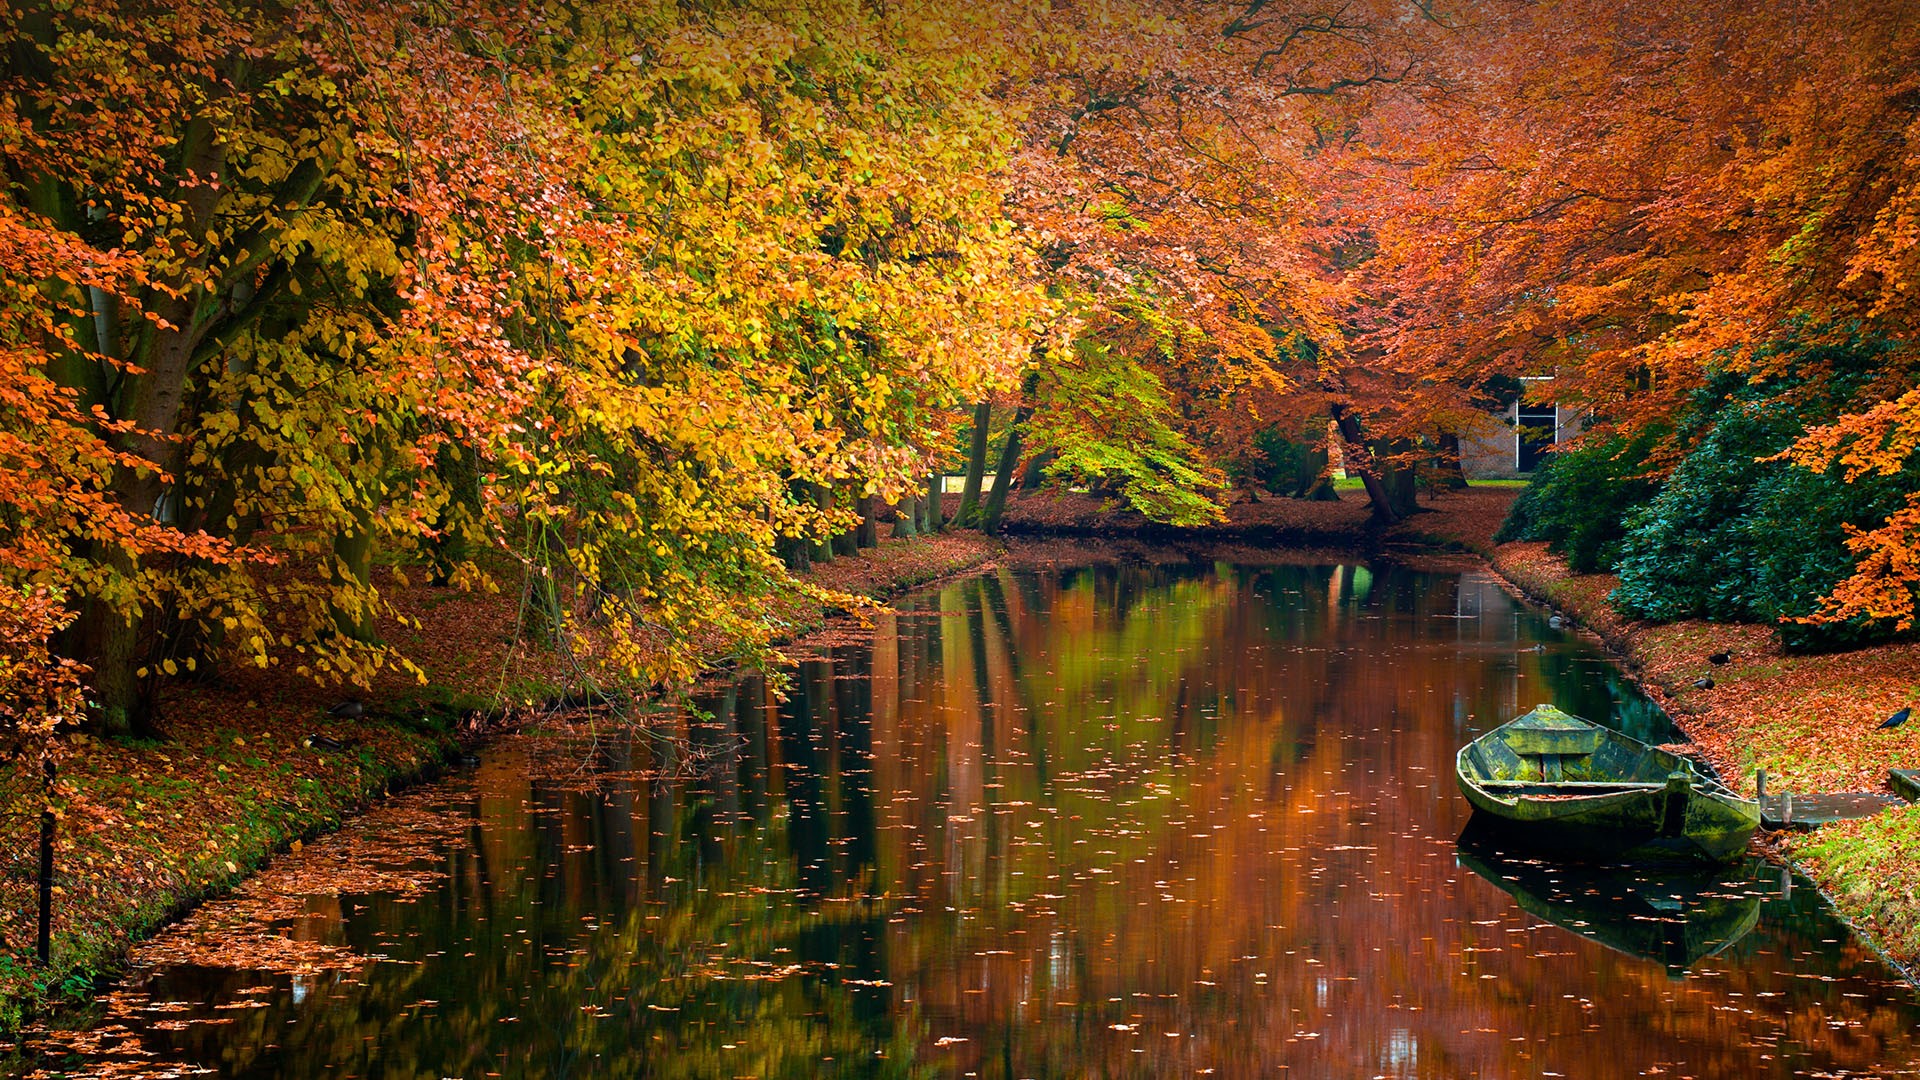 General 1920x1080 nature landscape boat trees house fall leaves plants reflection Netherlands